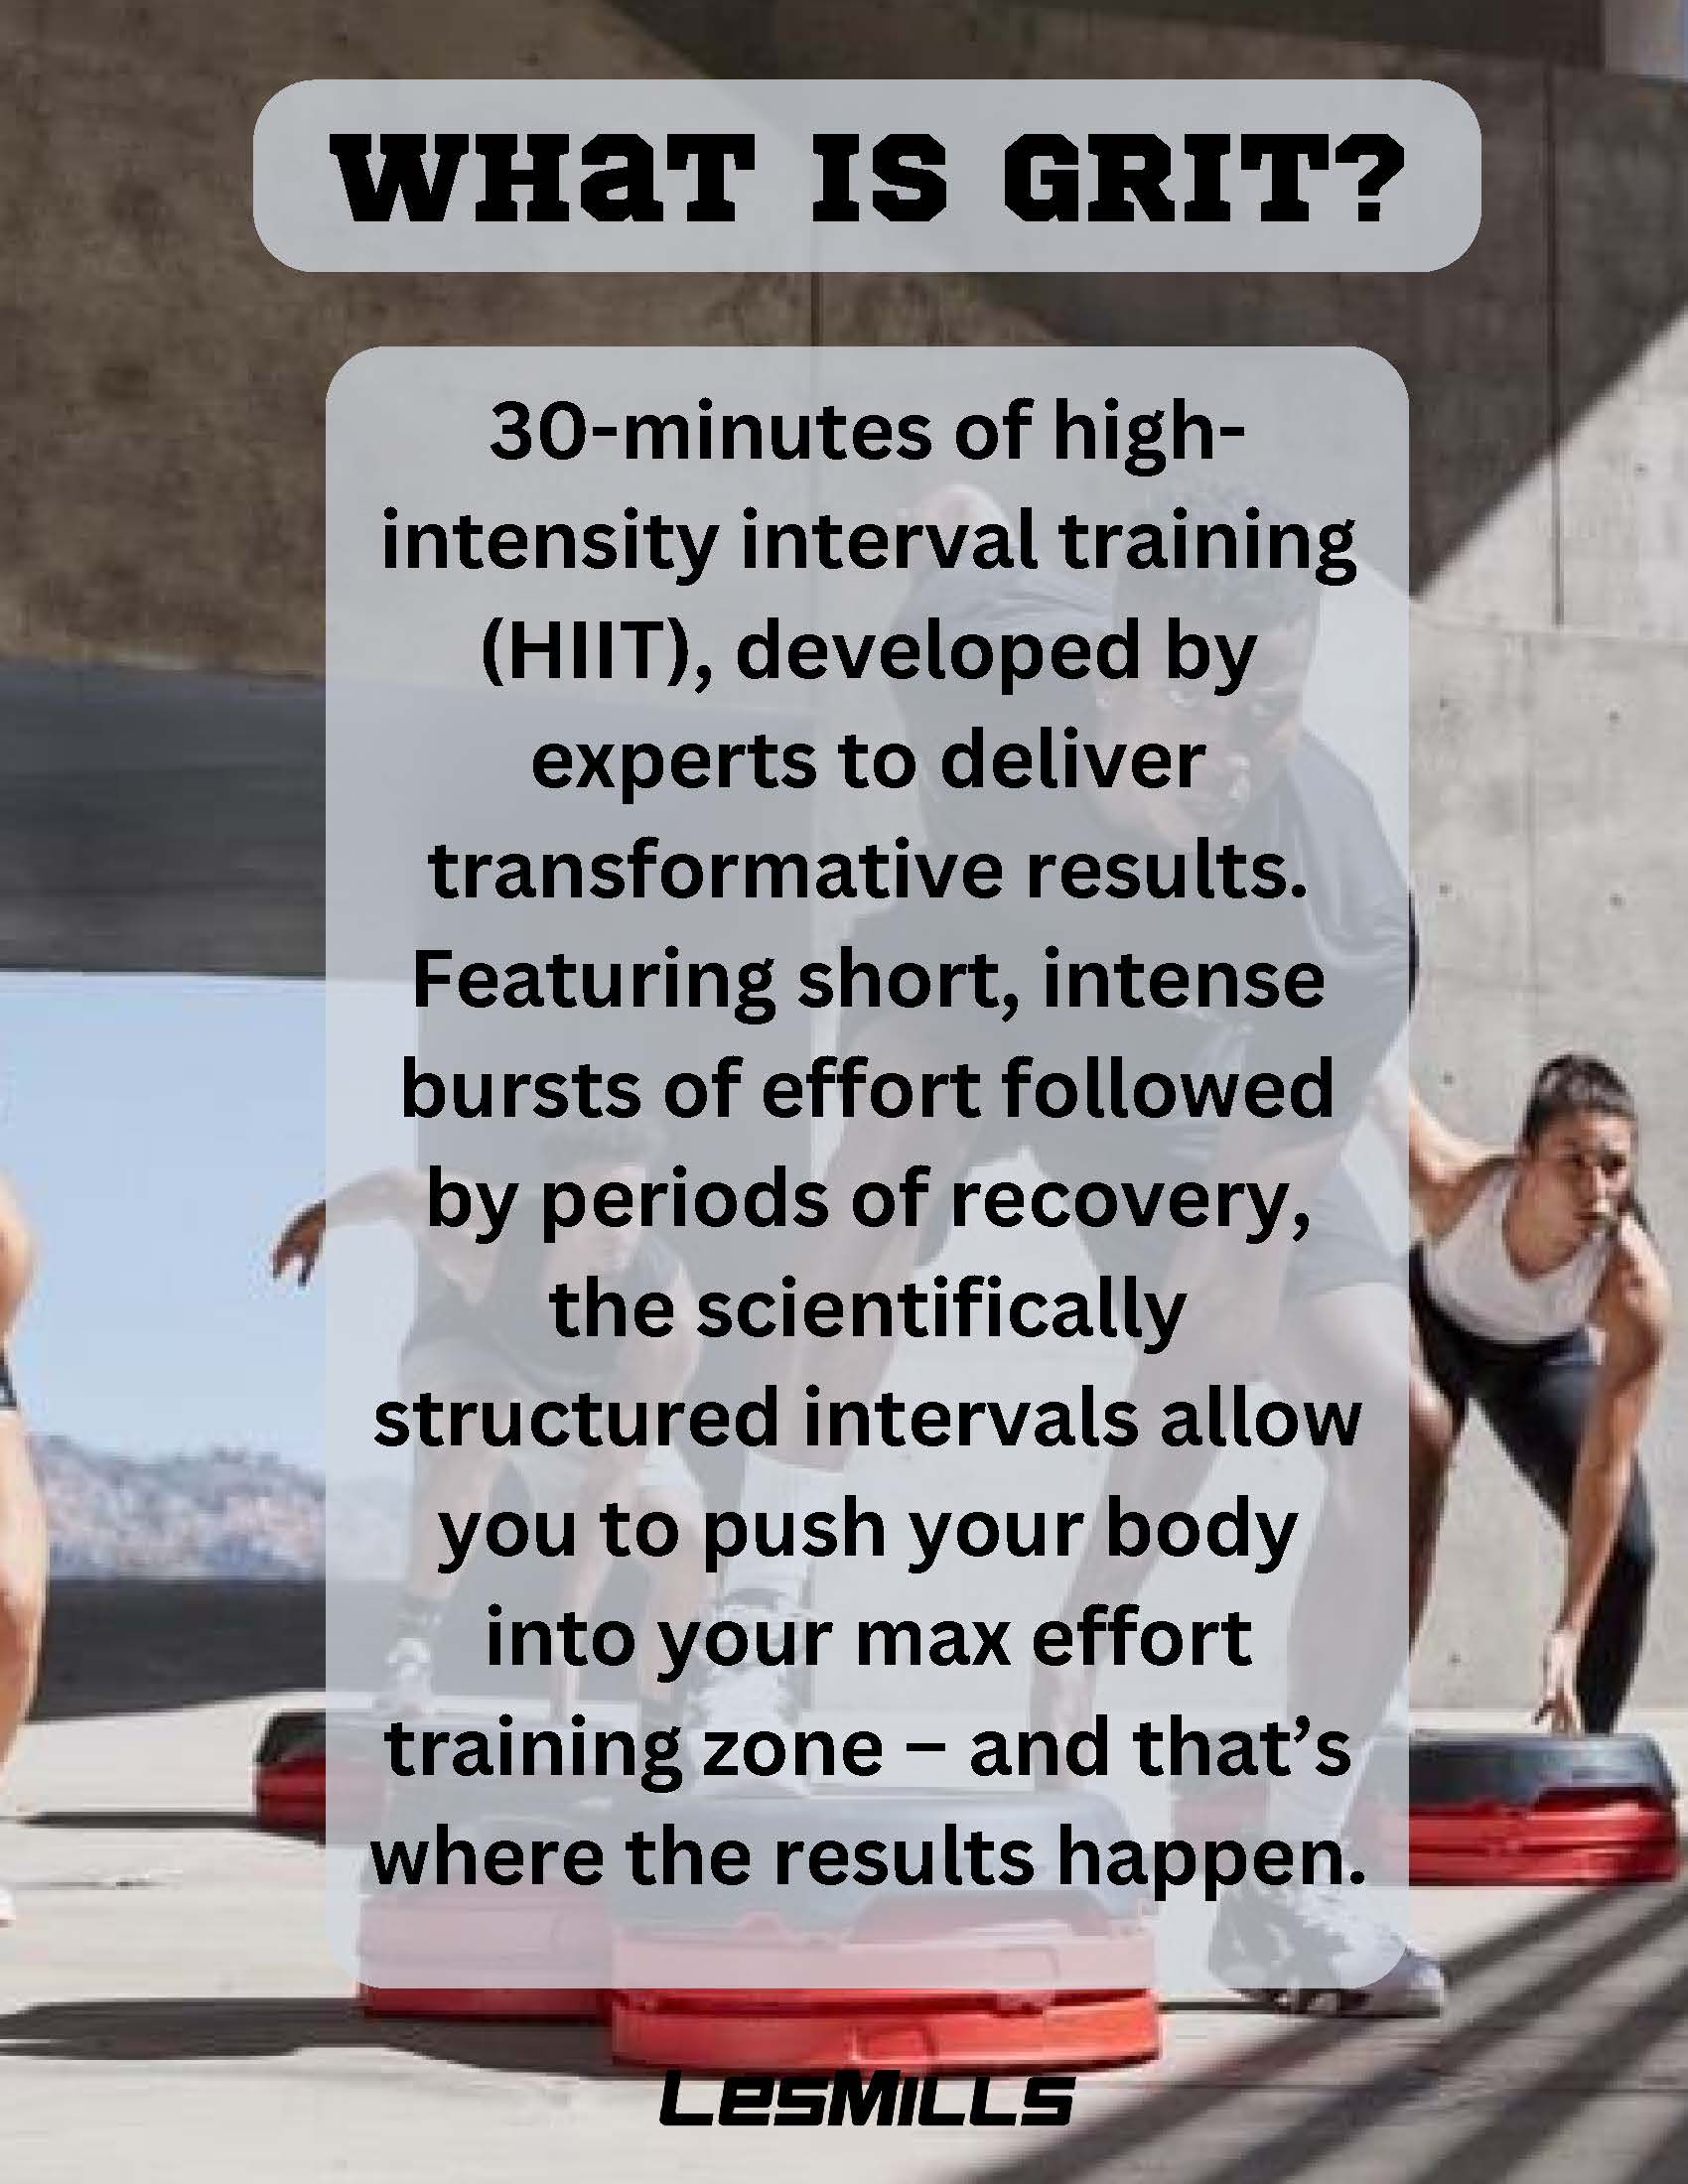 WHAT IS GRIT?             30-minutes of high-intensity interval training             (HIIT), developed by experts to deliver transformative results.             Featuring short, intense bursts of effort followed by periods of recovery, the scientifically structured intervals allow you to push your body into your max effort training zone - and that's where the results happen.